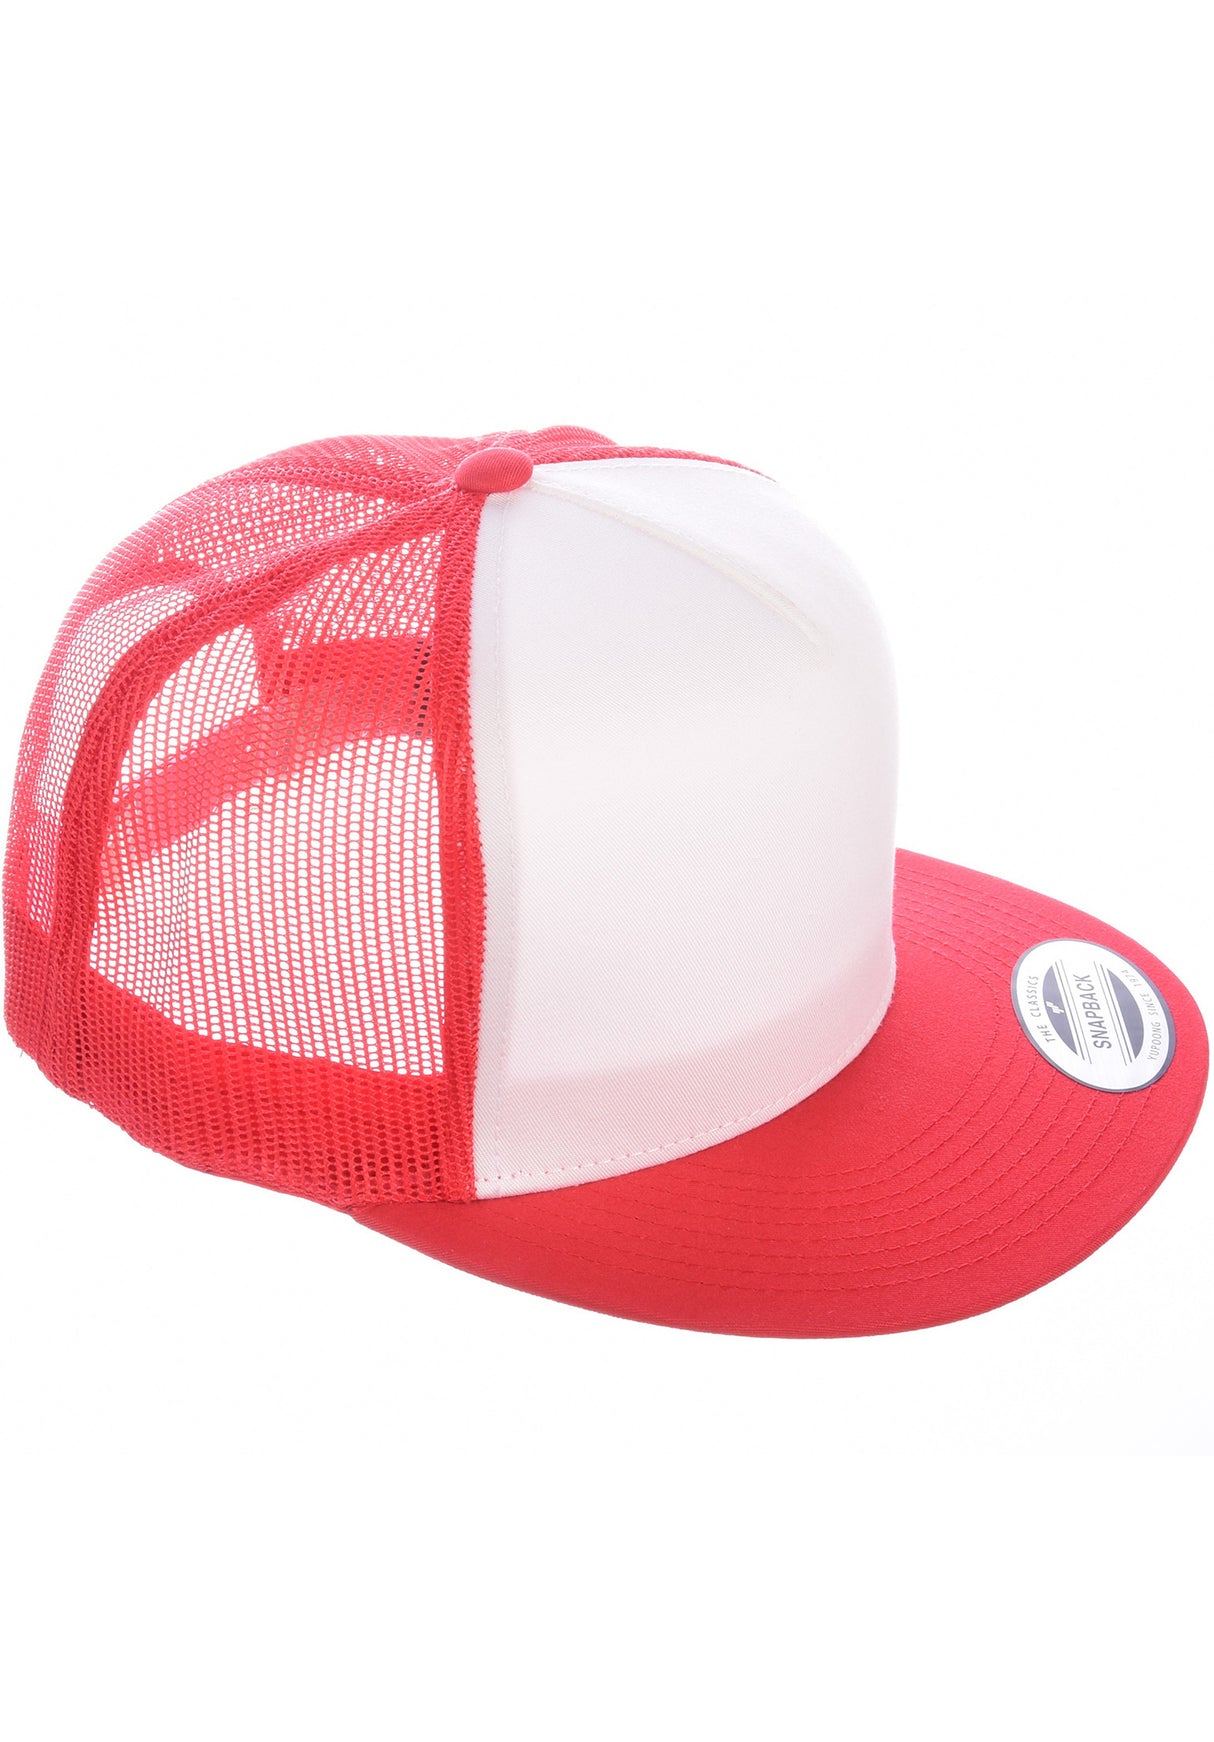 Flat Trucker Cap red-white-red Close-Up2